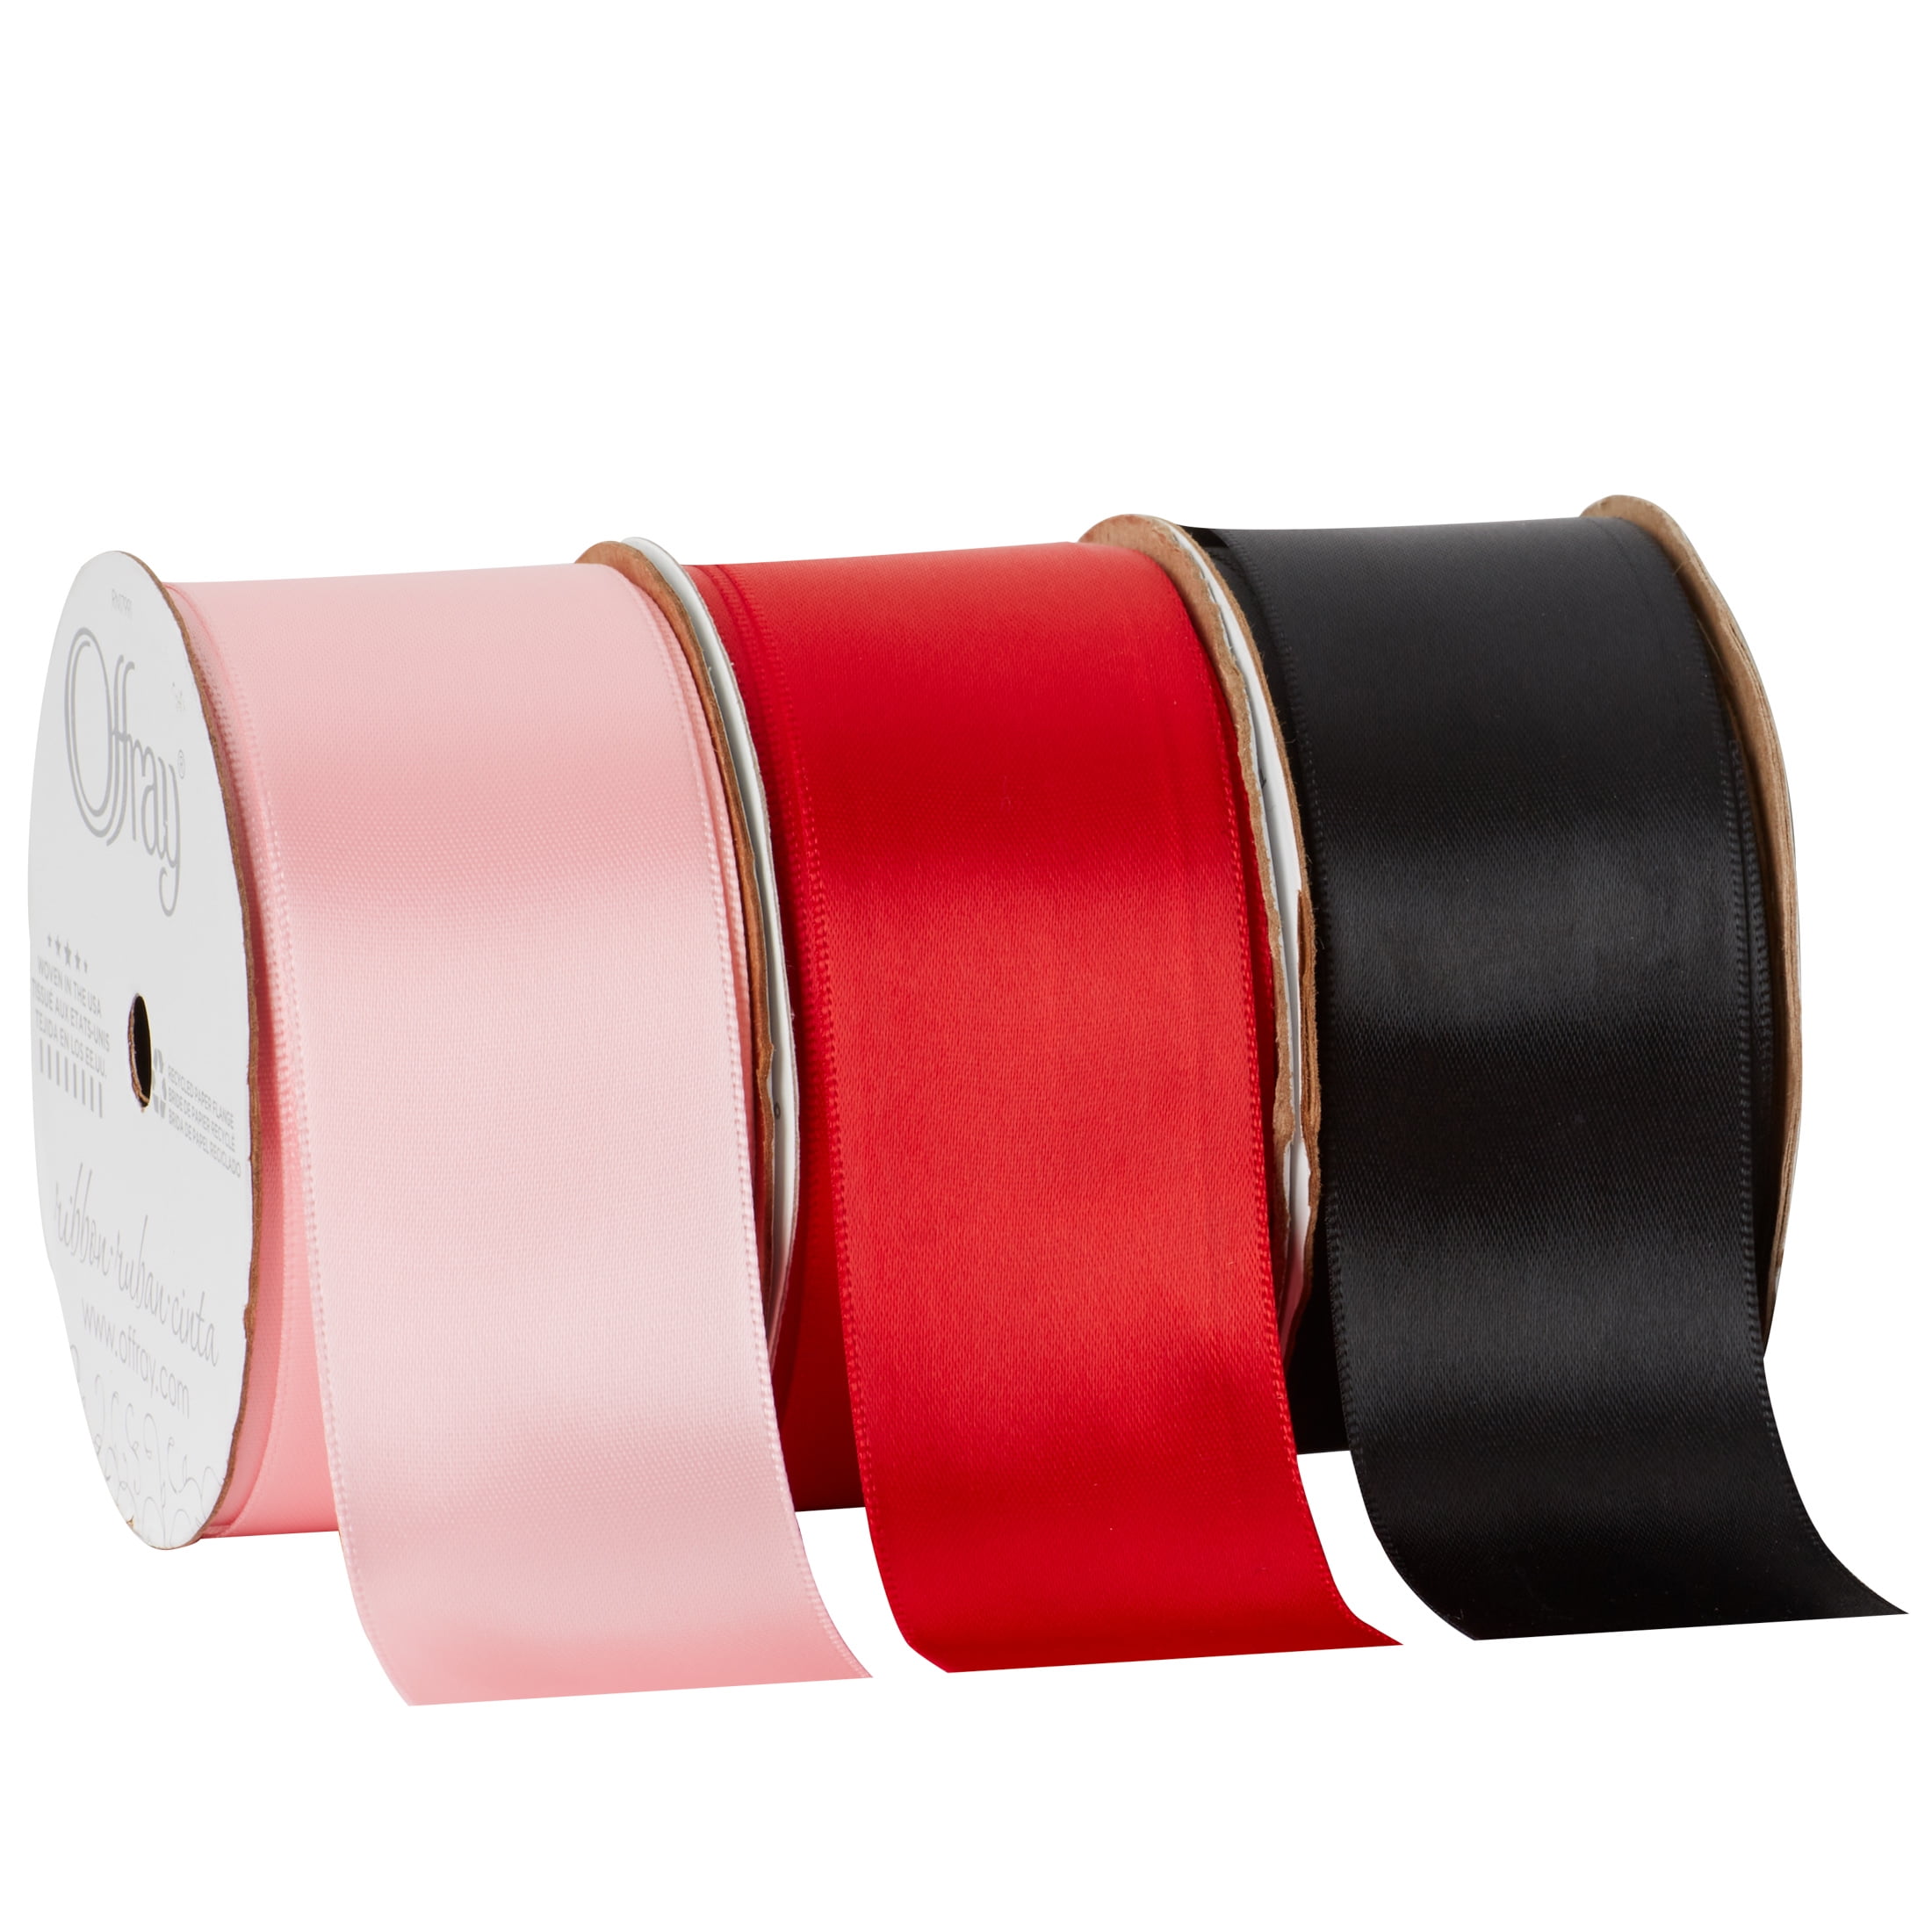 Offray Ribbon, Chateau Rose Pink 1 1/2 inch Double Face Satin